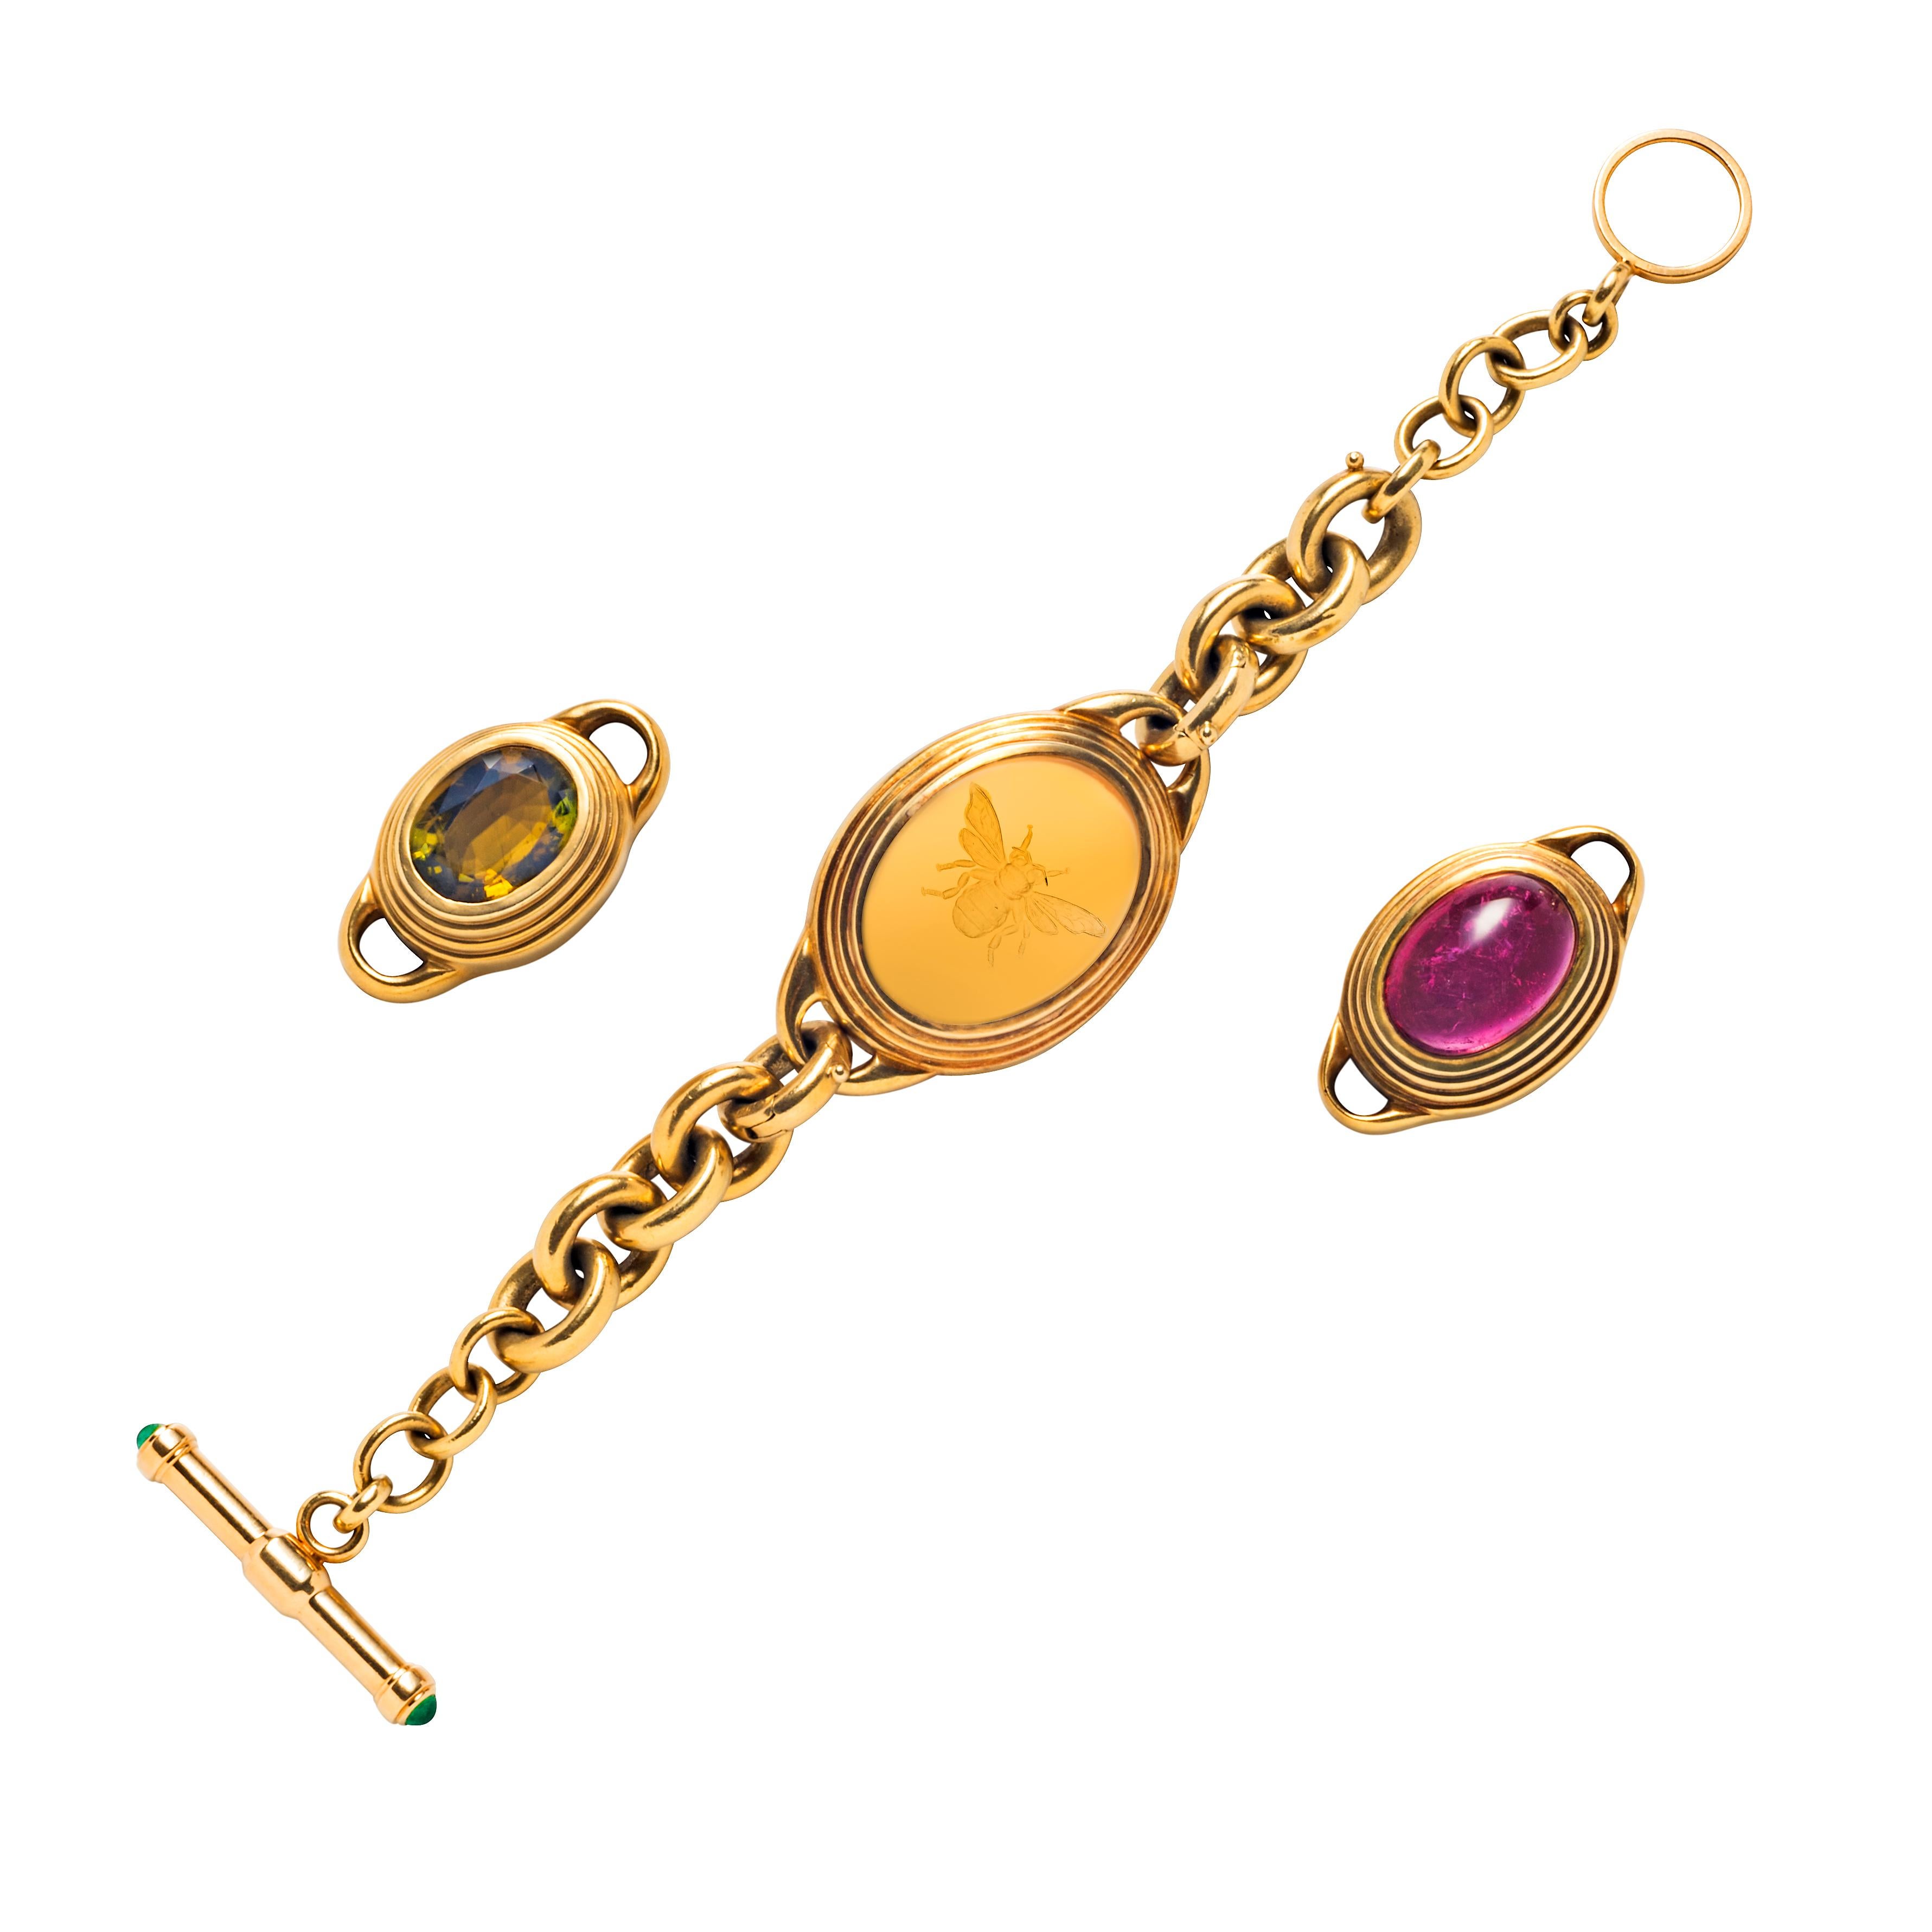 A curb link bracelet with interchangeable center pieces, featuring an oval citrine cabochon intaglio of a bee motif, an oval pink tourmaline cabochon and an oval mixed-cut green tourmaline; the toggle ends set with cabochon emeralds; mounted in 18k